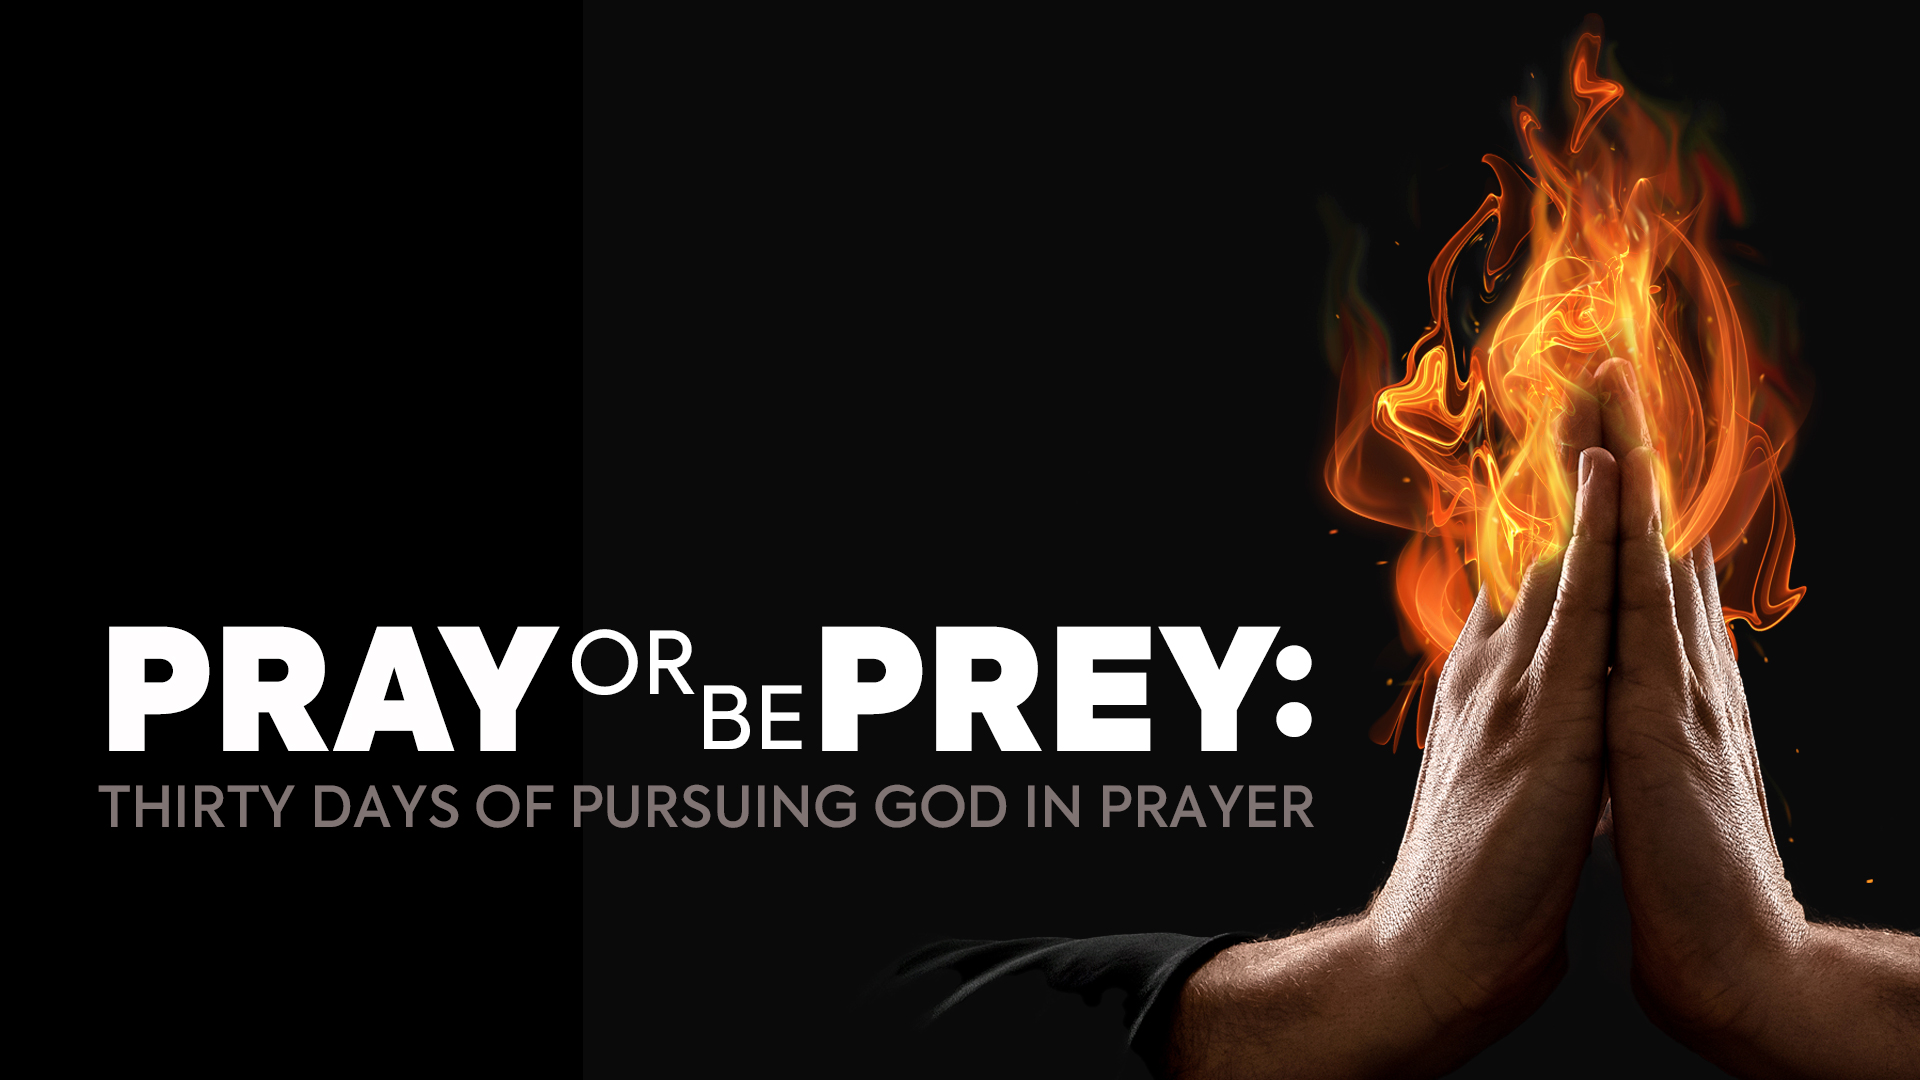 Featured image for “Pray or Be Prey”